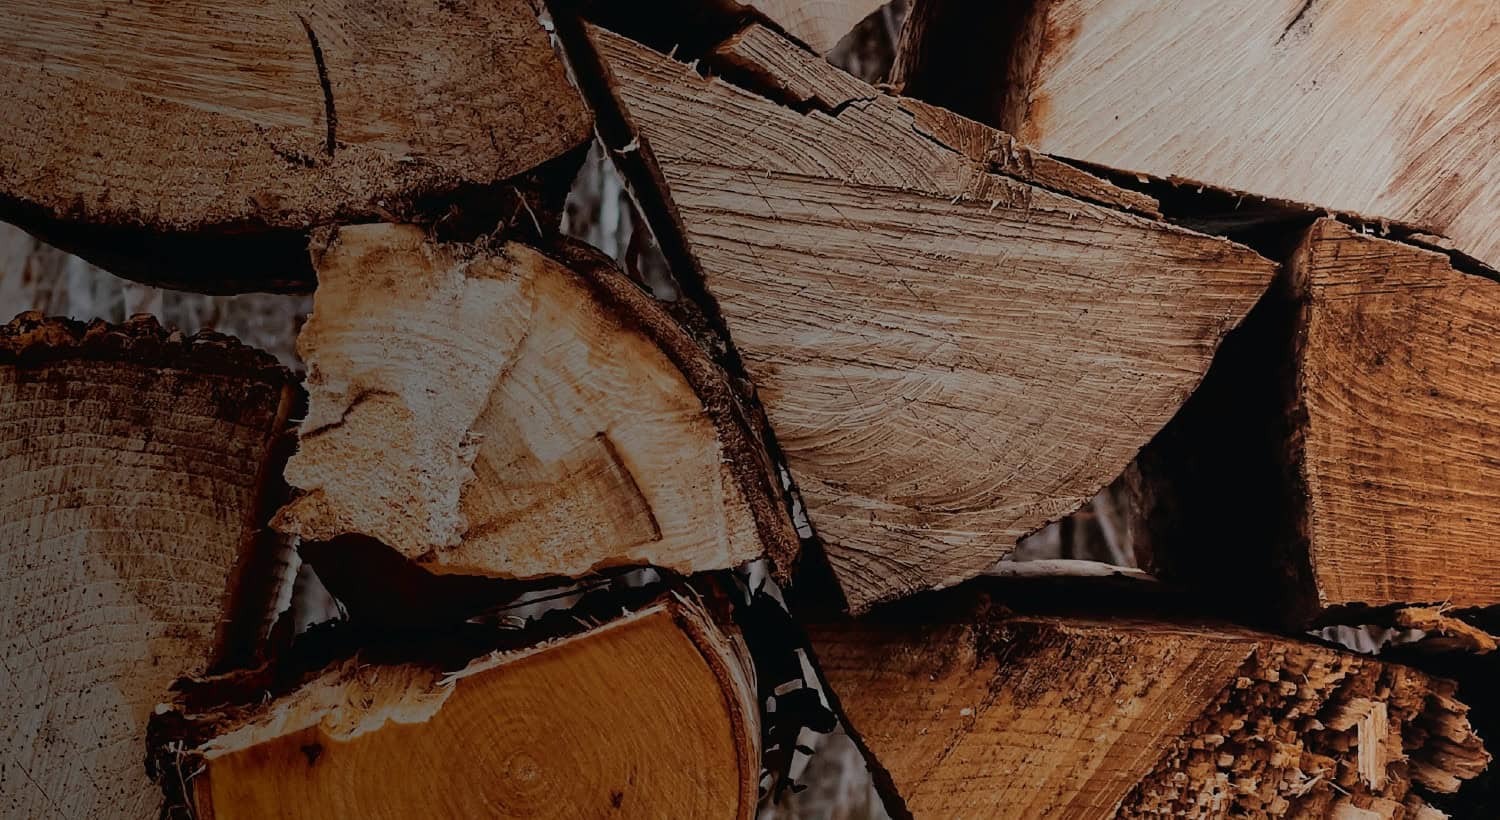 Background image of wood samples